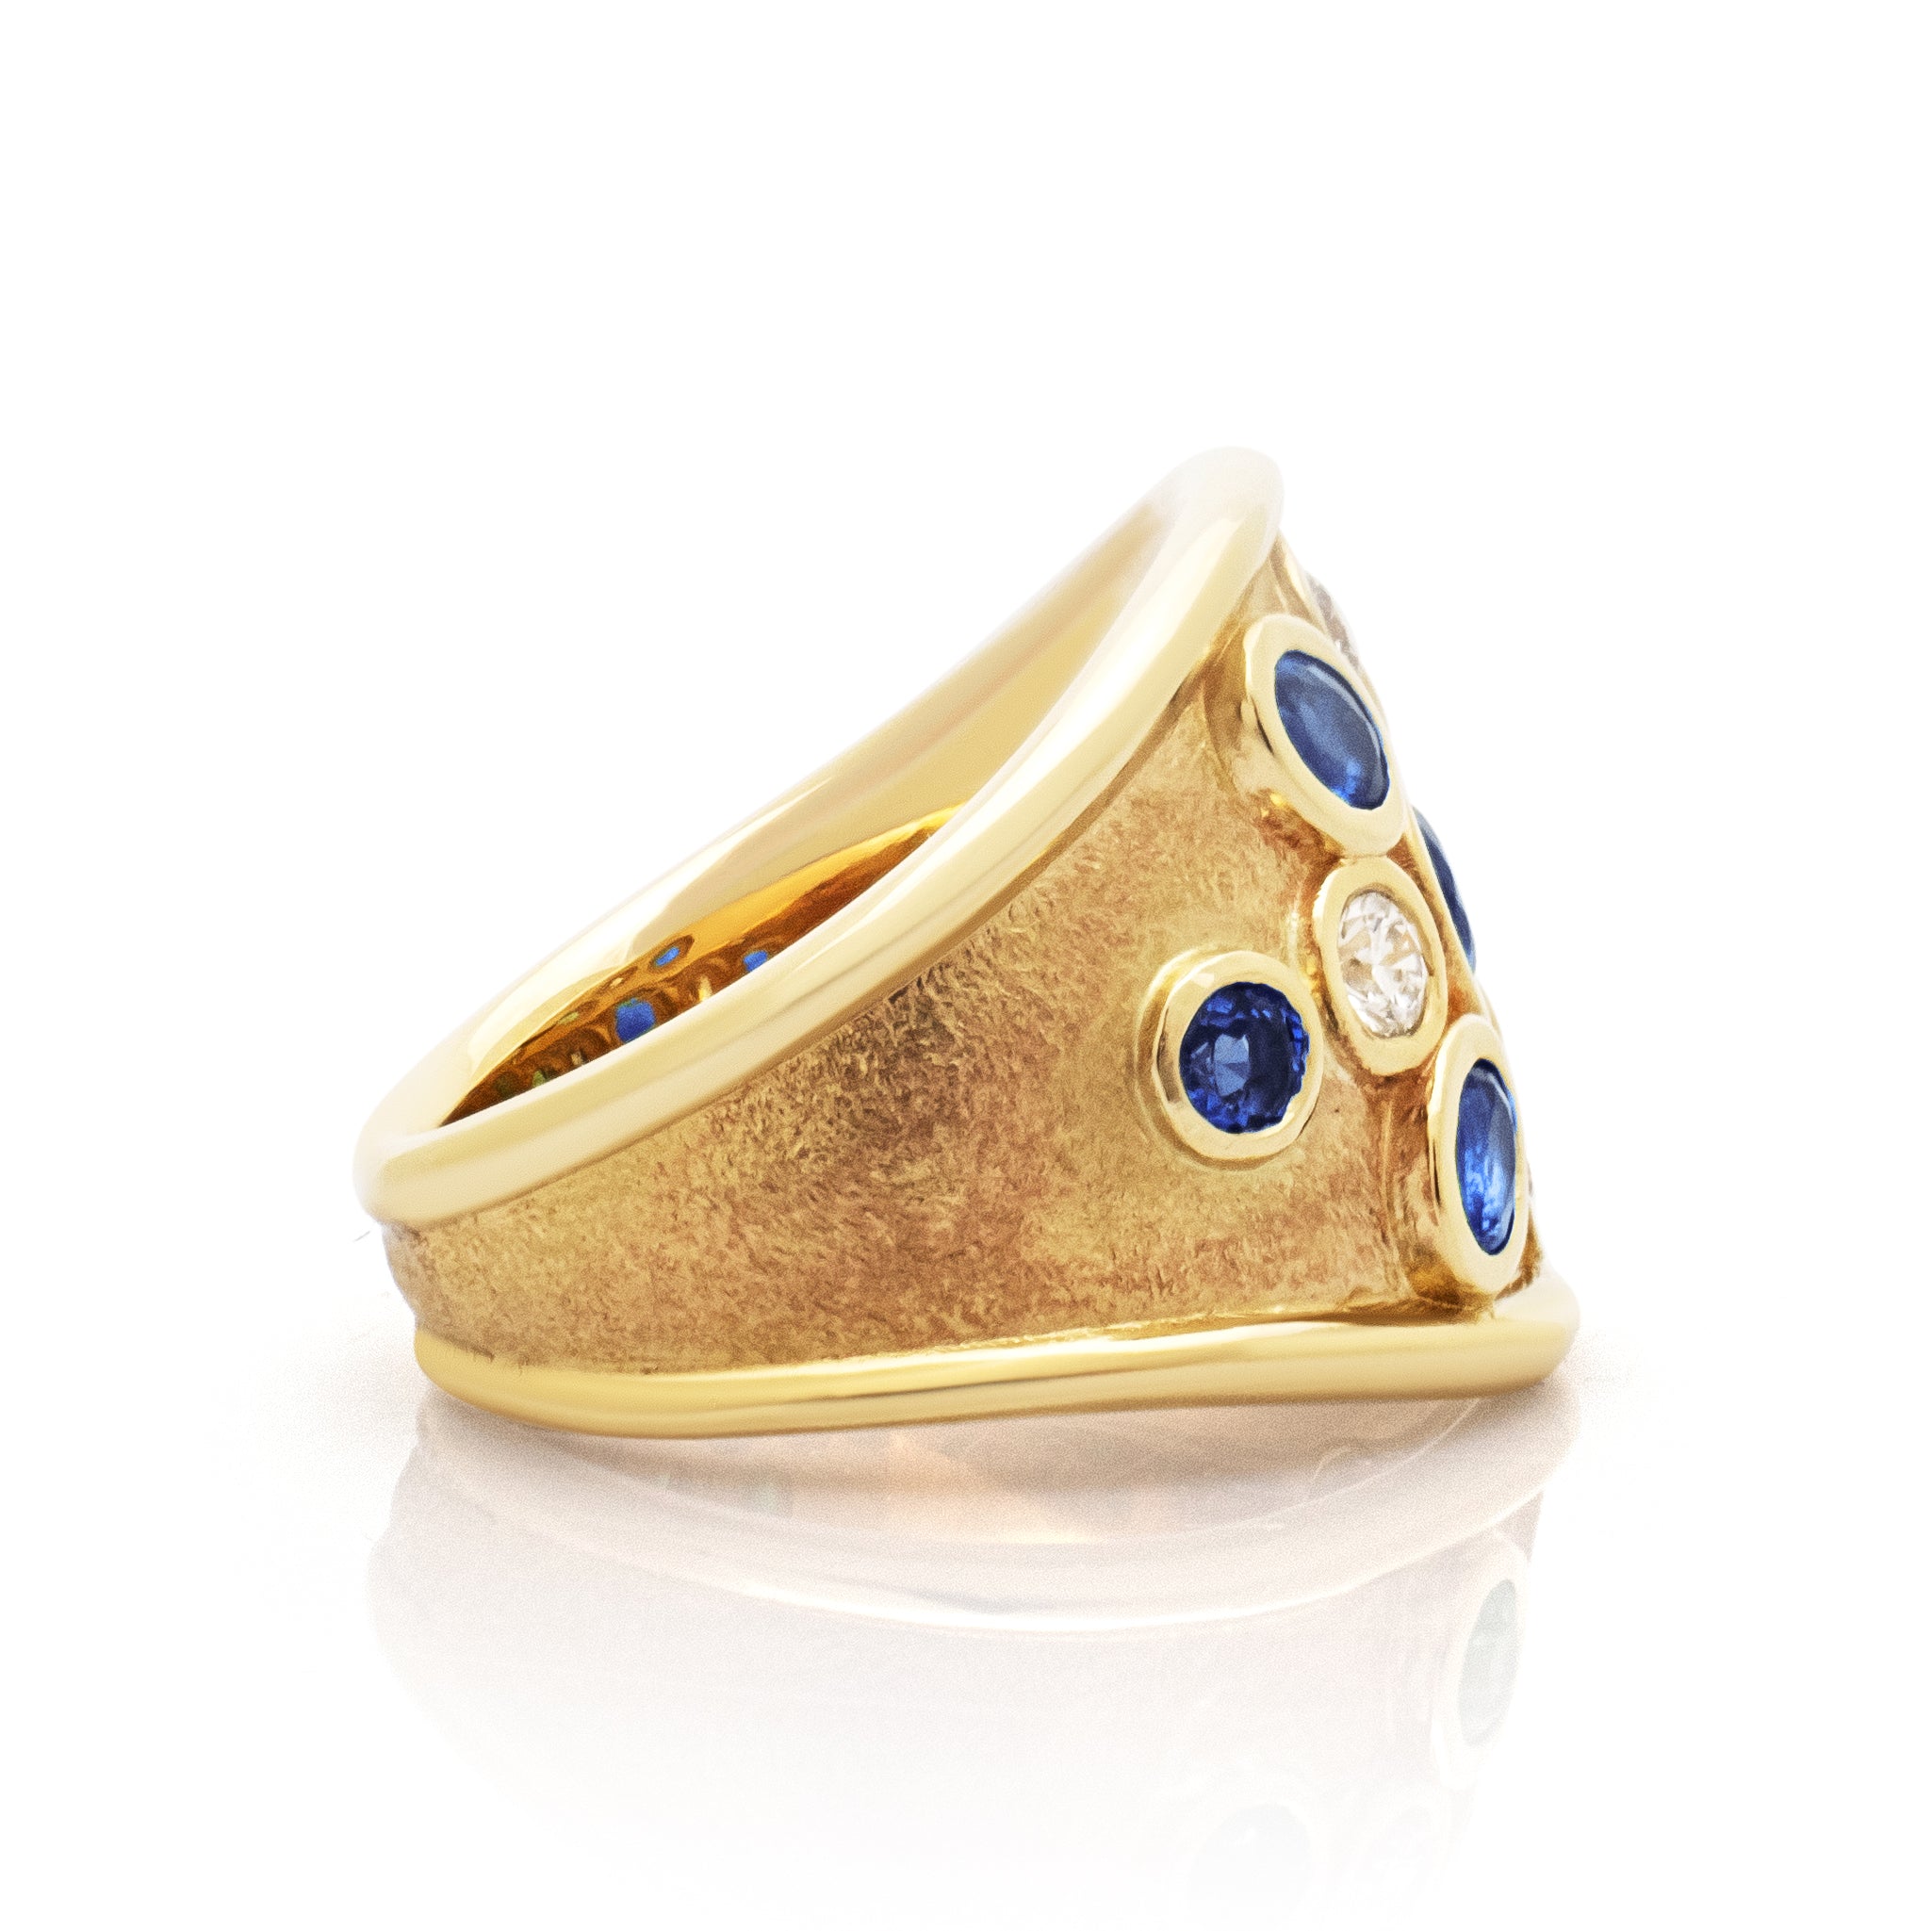 Sapphire and Diamond Droplet Ring. Sapphire and Diamond ring. Solid gold ring. Sapphire and diamond jewellery. Elizabethan style ring.